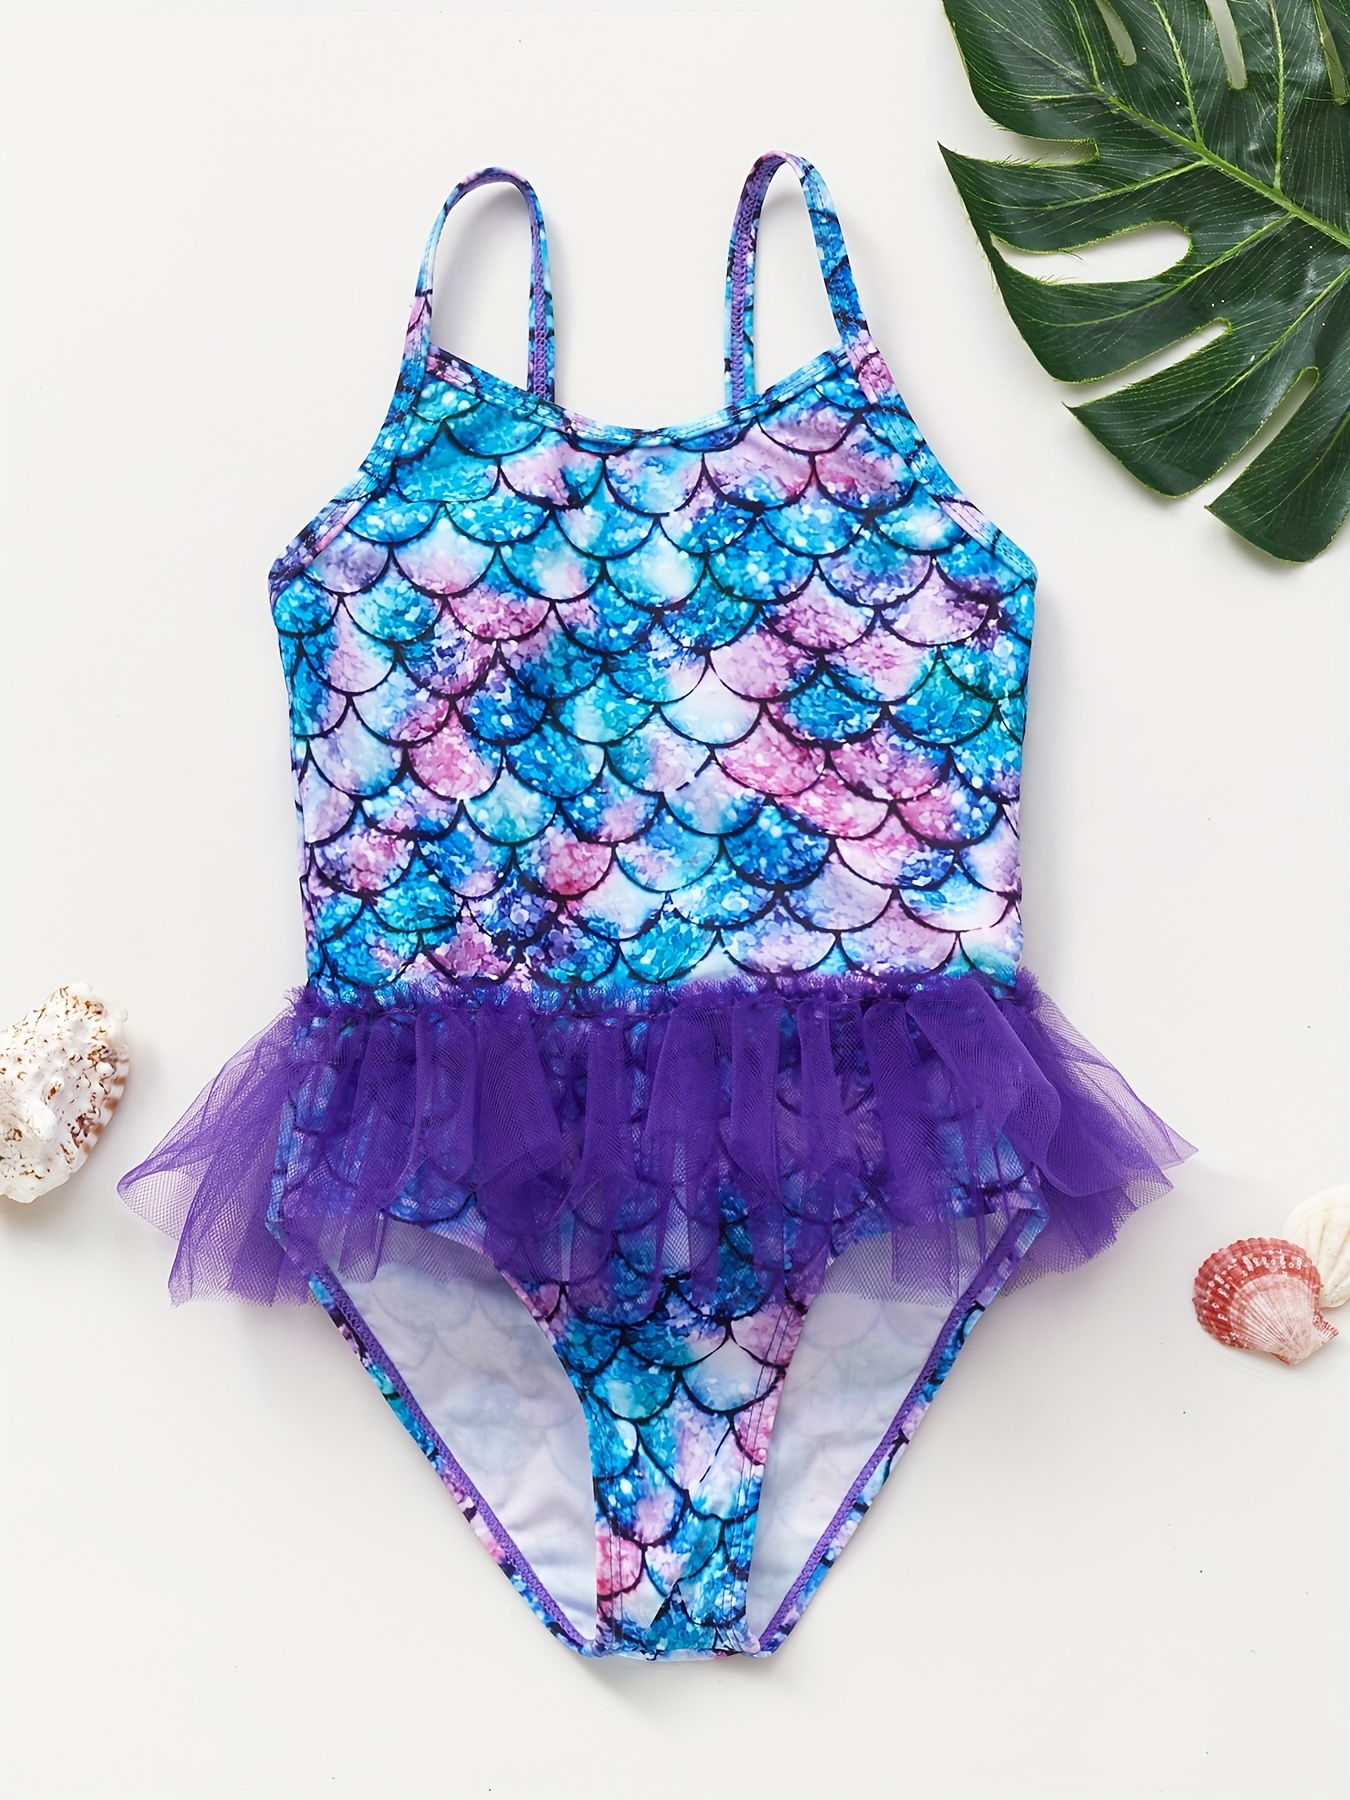 Girls One-piece Swimsuit Sleeveless Camisole Mermaid Fish Scale Print Mesh  Decor Kids Clothes Vacation Beach Bathing Casual Bathing Suit Summer